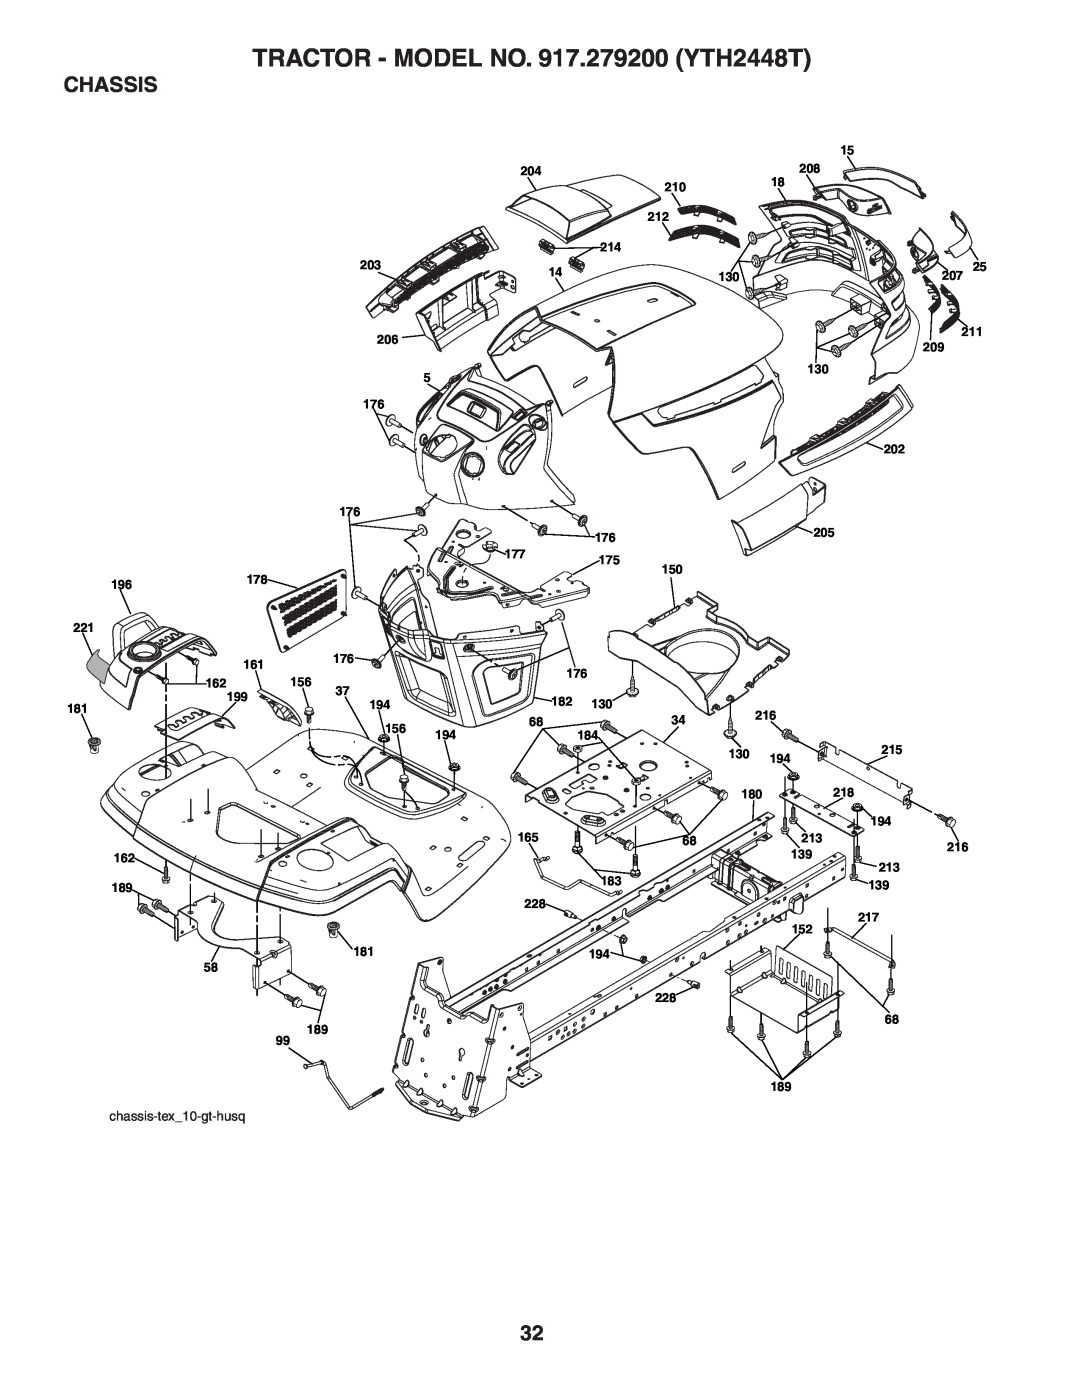 Husqvarna owner manual Chassis, TRACTOR - MODEL NO. 917.279200 YTH2448T, chassis-tex10-gt-husq 